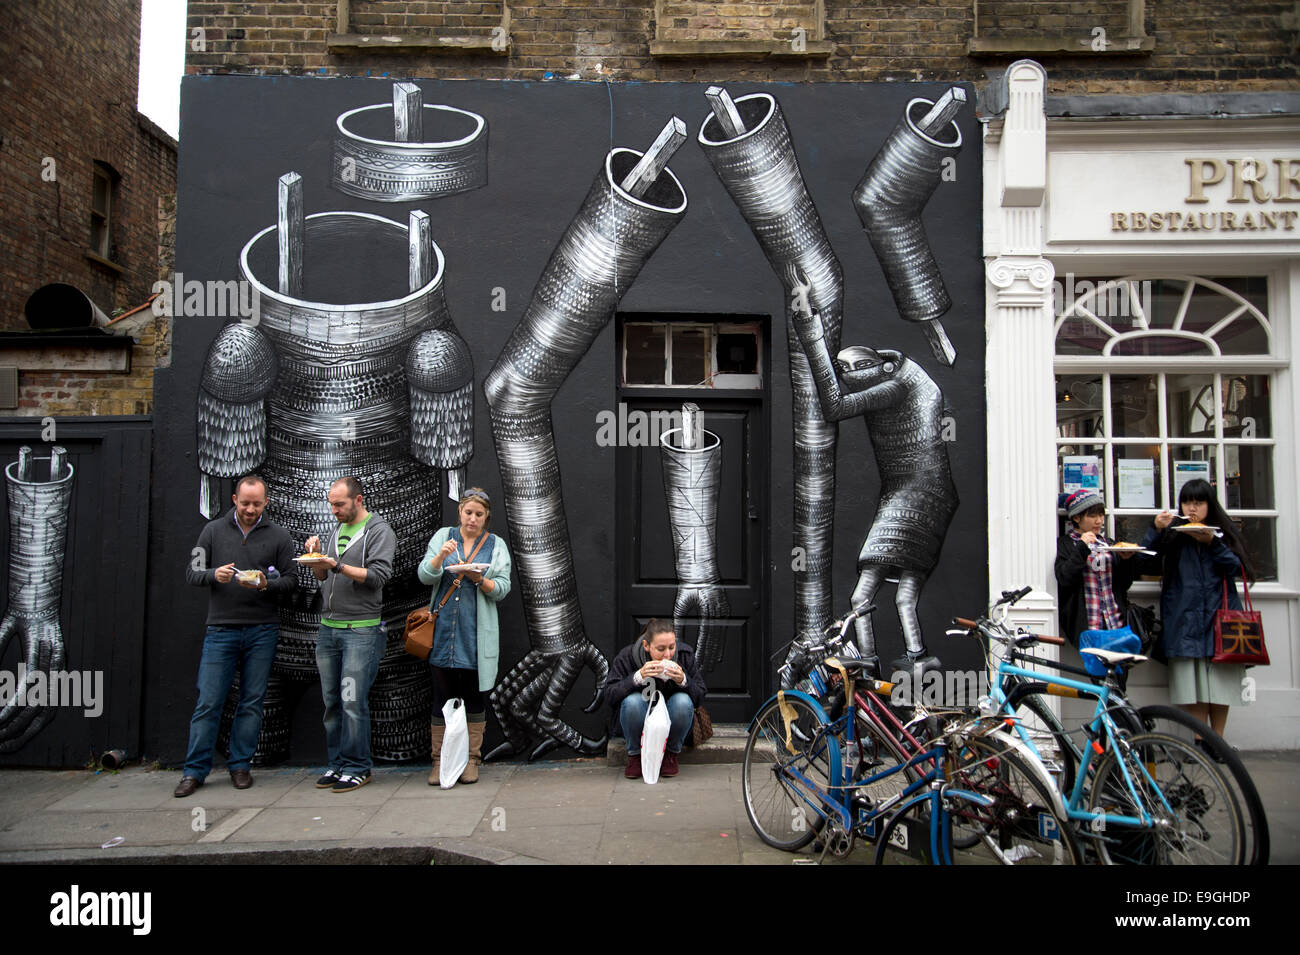 Brick Lane. Sunday lunchtime. People eat on the street next to a piece of street art. Stock Photo